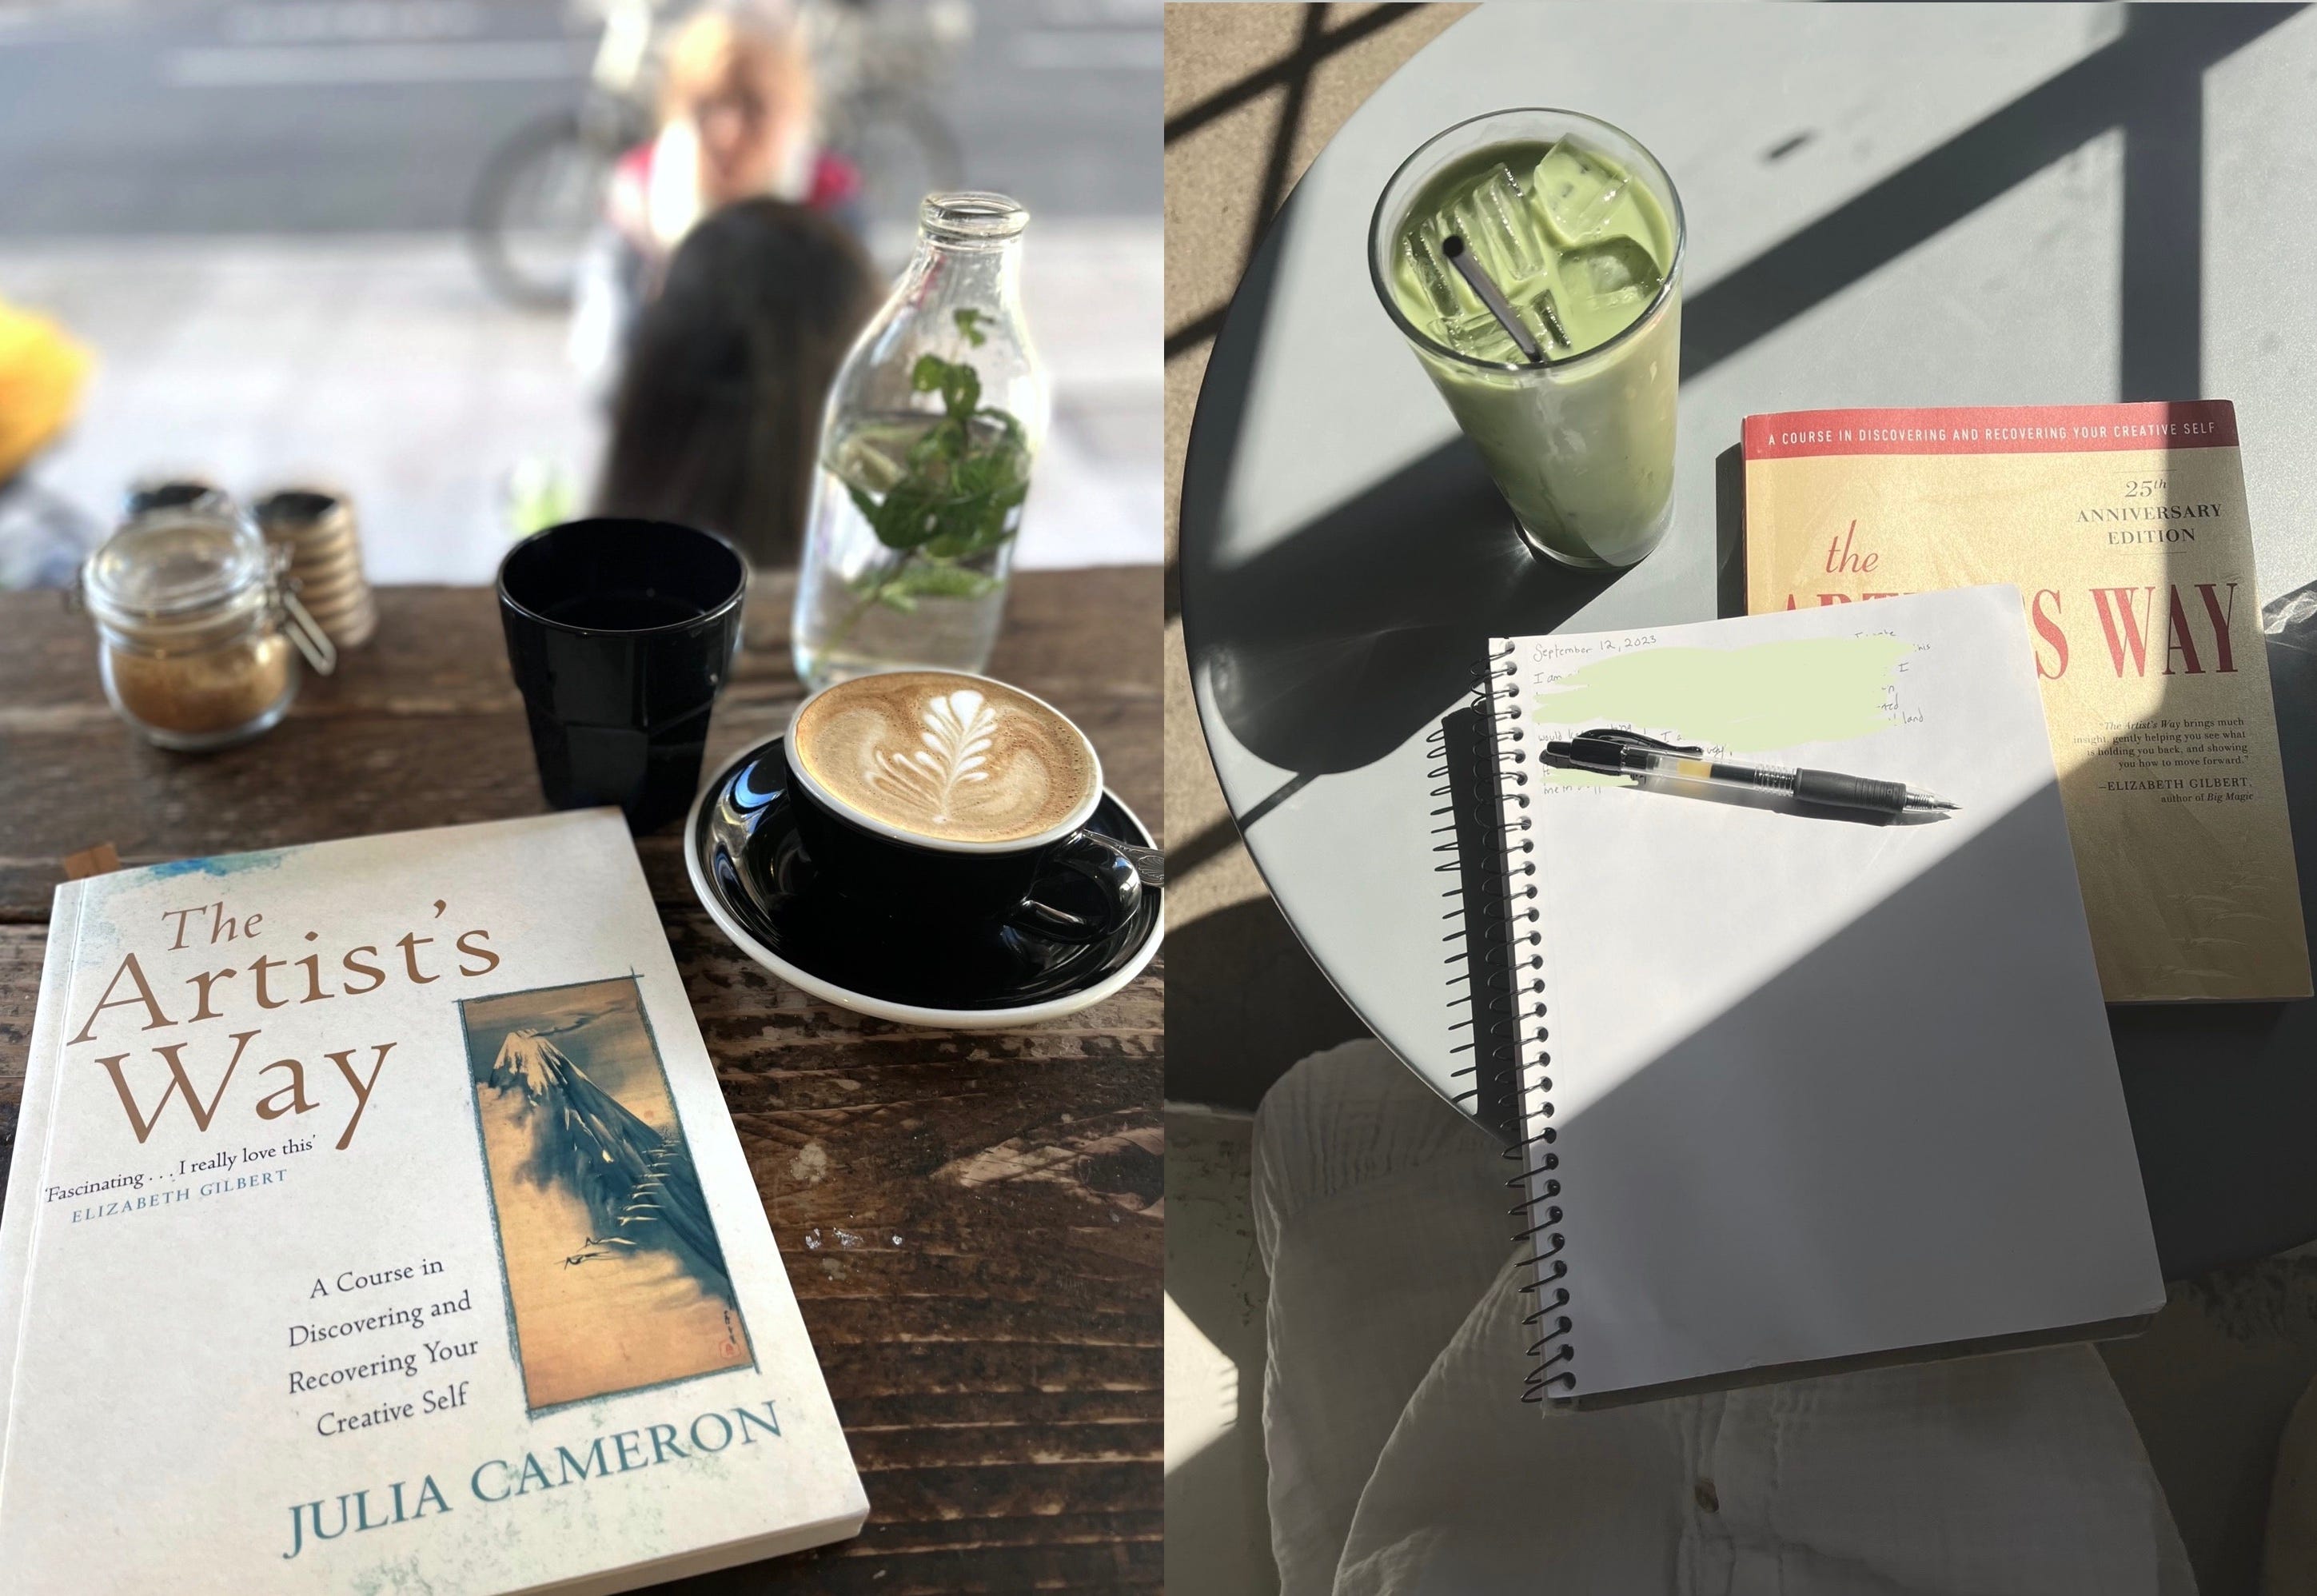 The Artist's Way: 25th Anniversary Edition by Julia Cameron